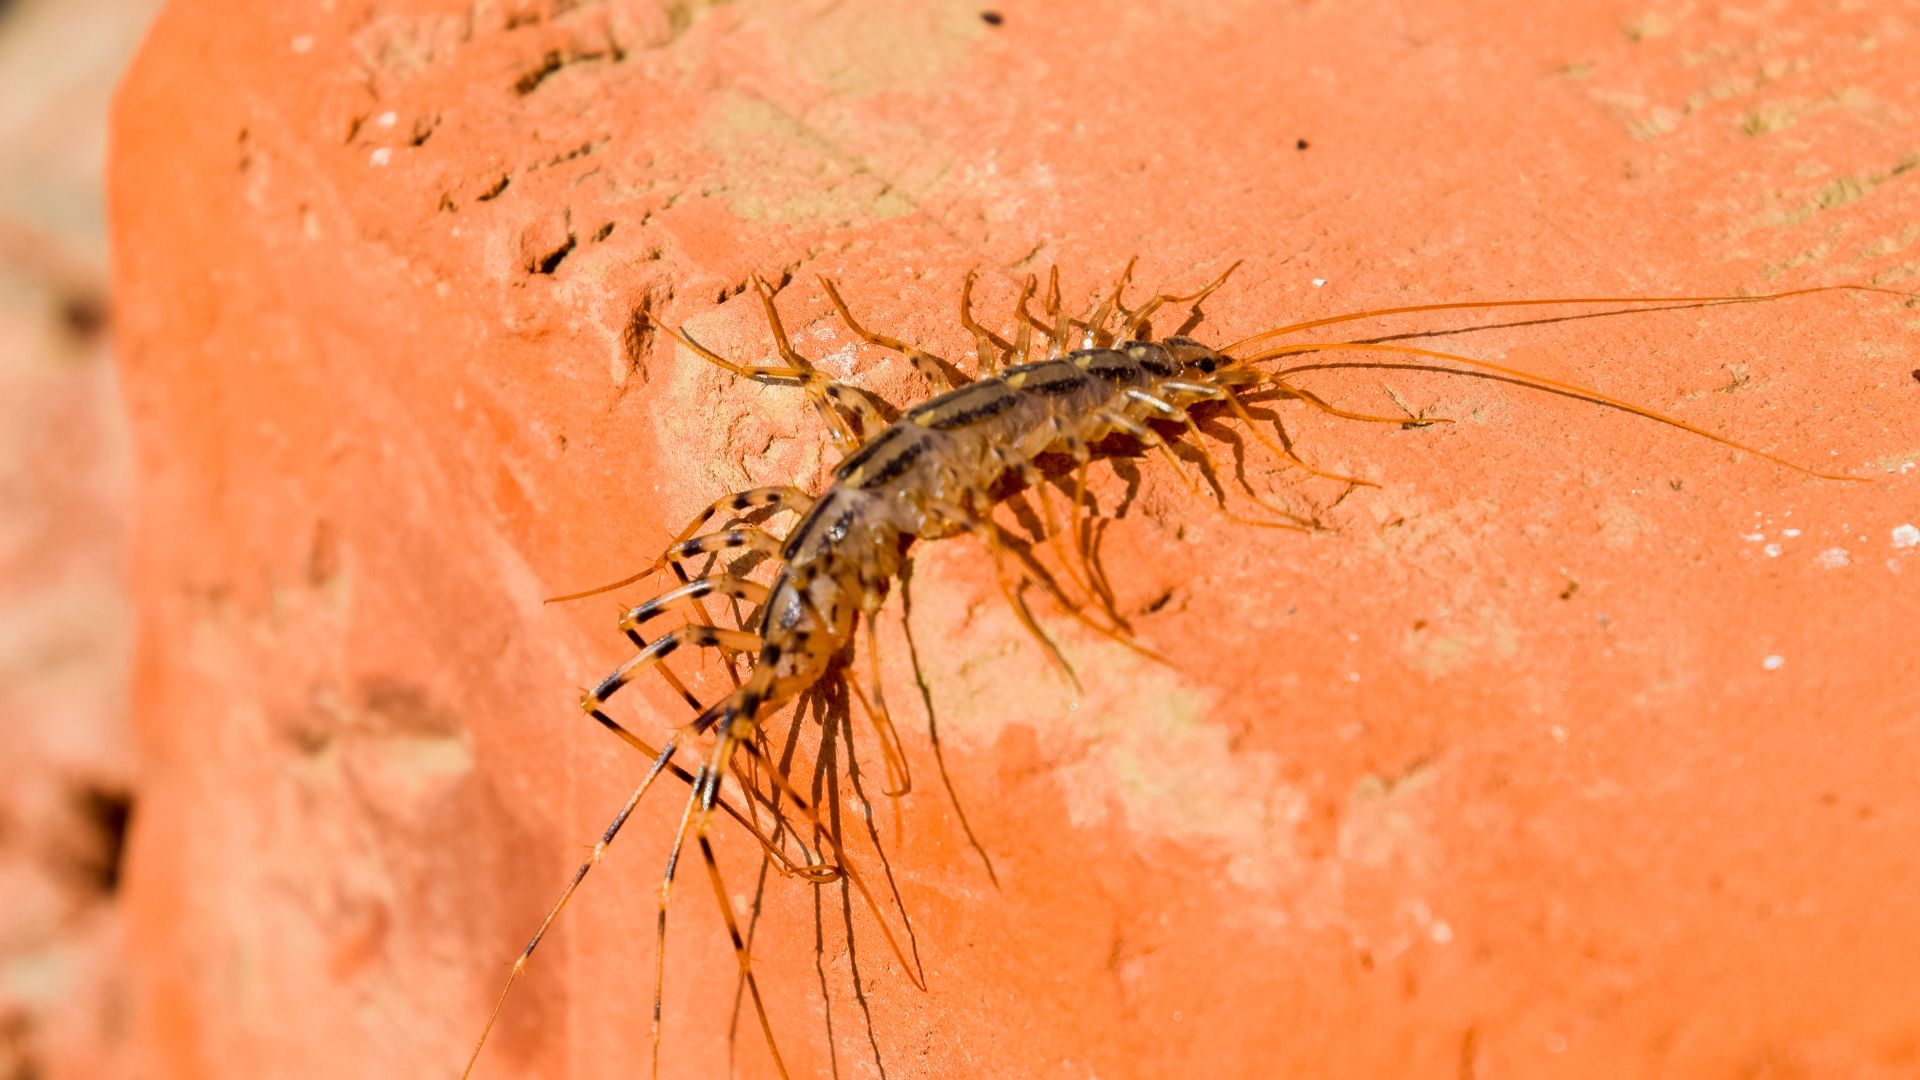 An image of a centipede crawling along a brick on the outside of a home.